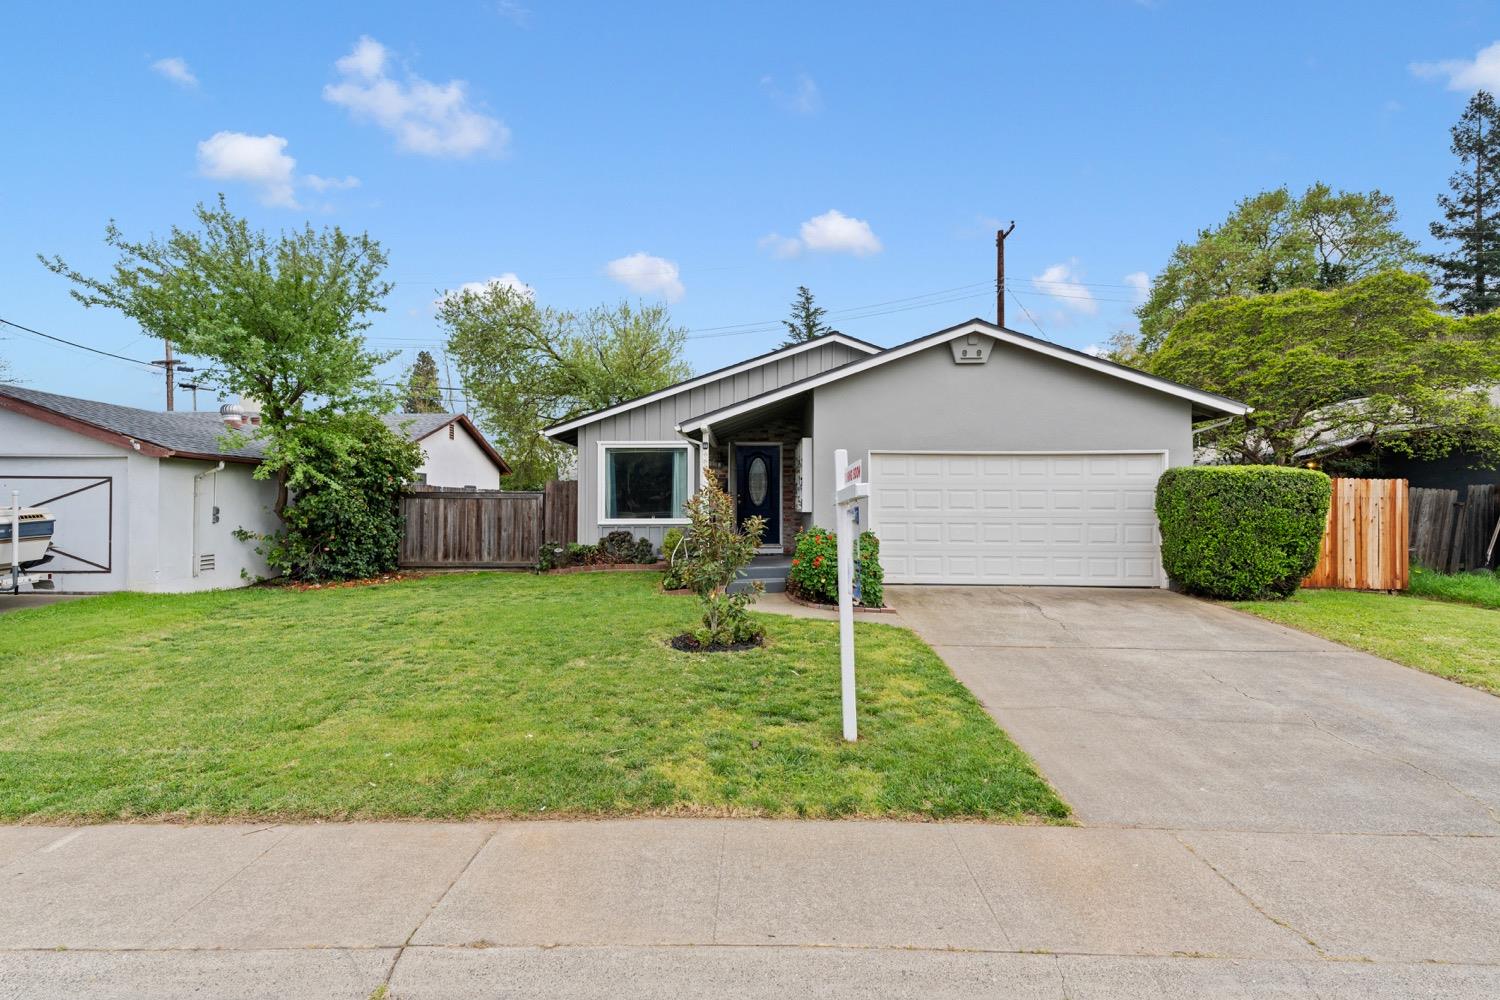 Welcome to 8890 Sharkey way, Located in a highly sought-after Elk Grove school district Nestled in a